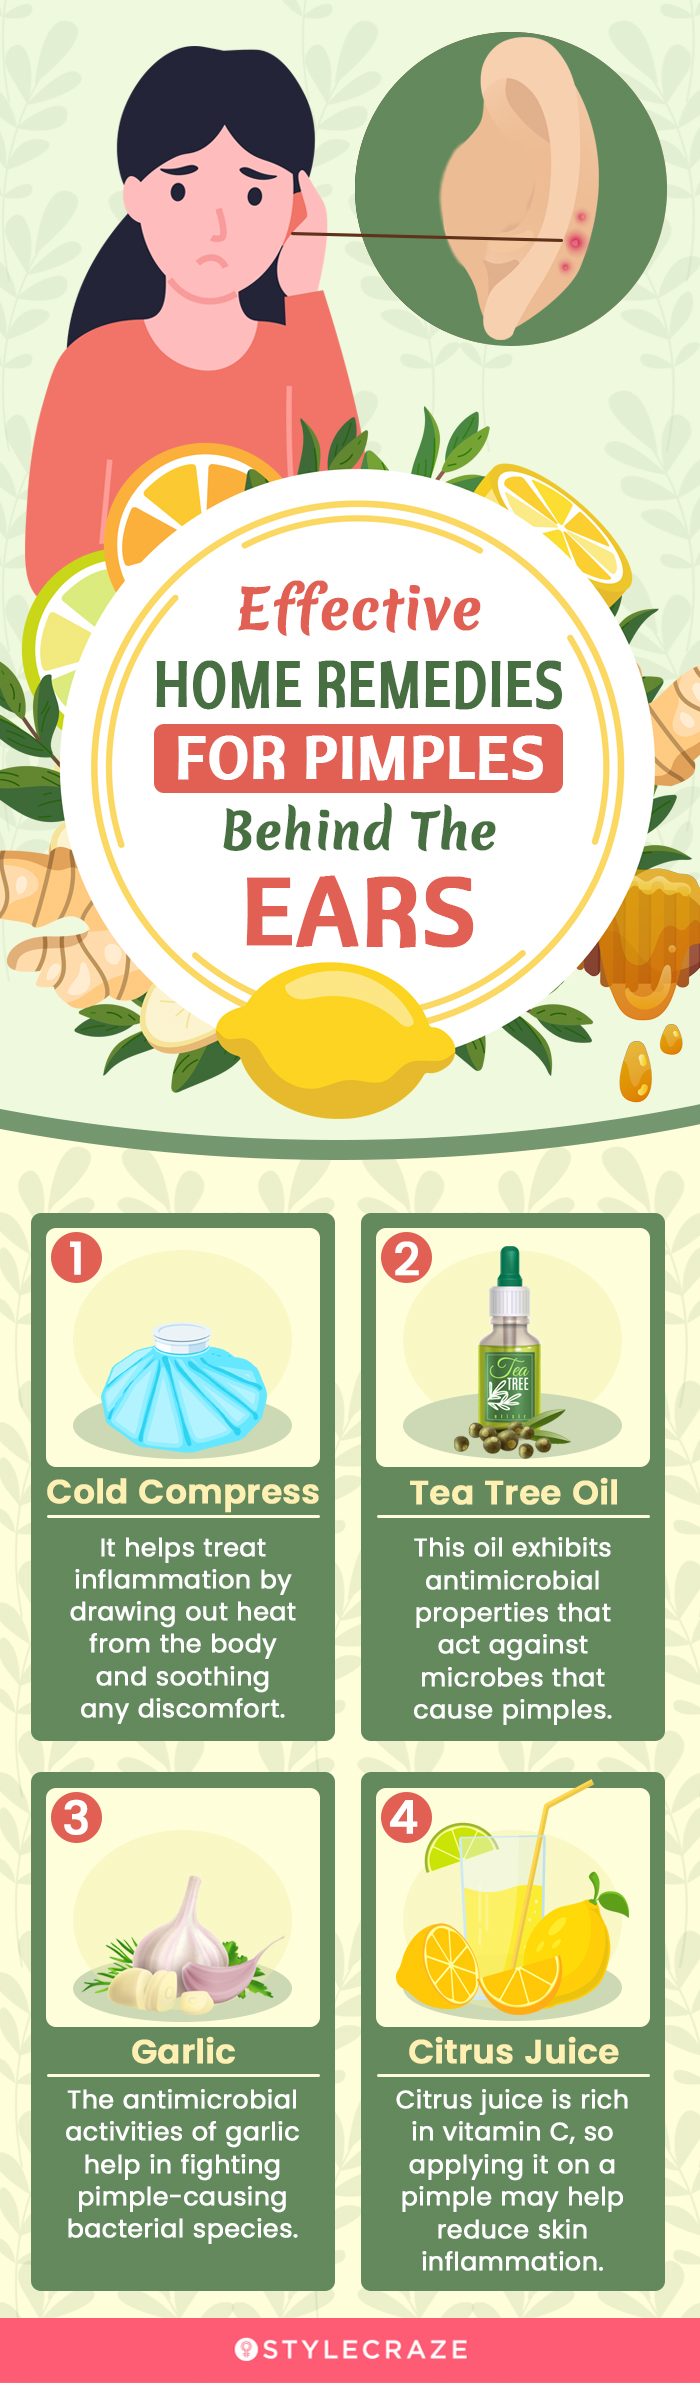 effective home remedies for pimples behind the ears (infographic)